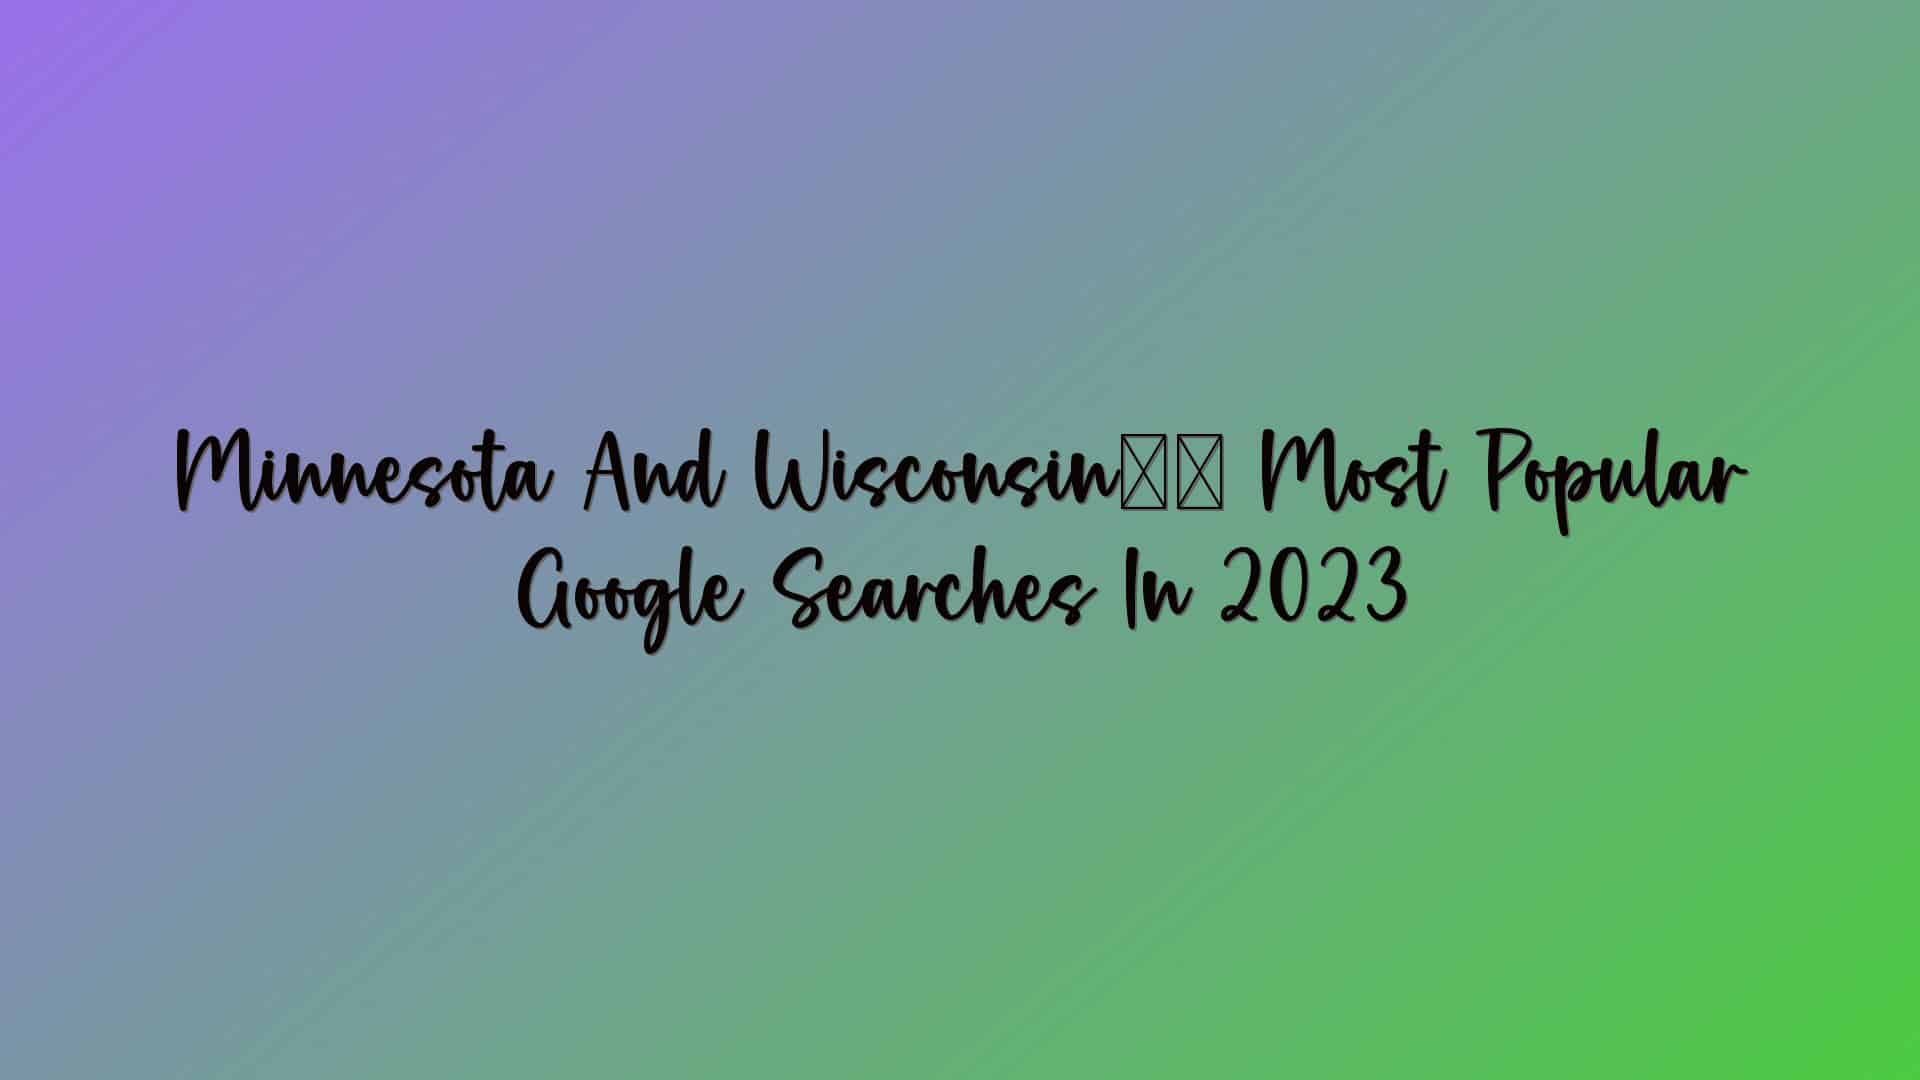 Minnesota And Wisconsin’s Most Popular Google Searches In 2023